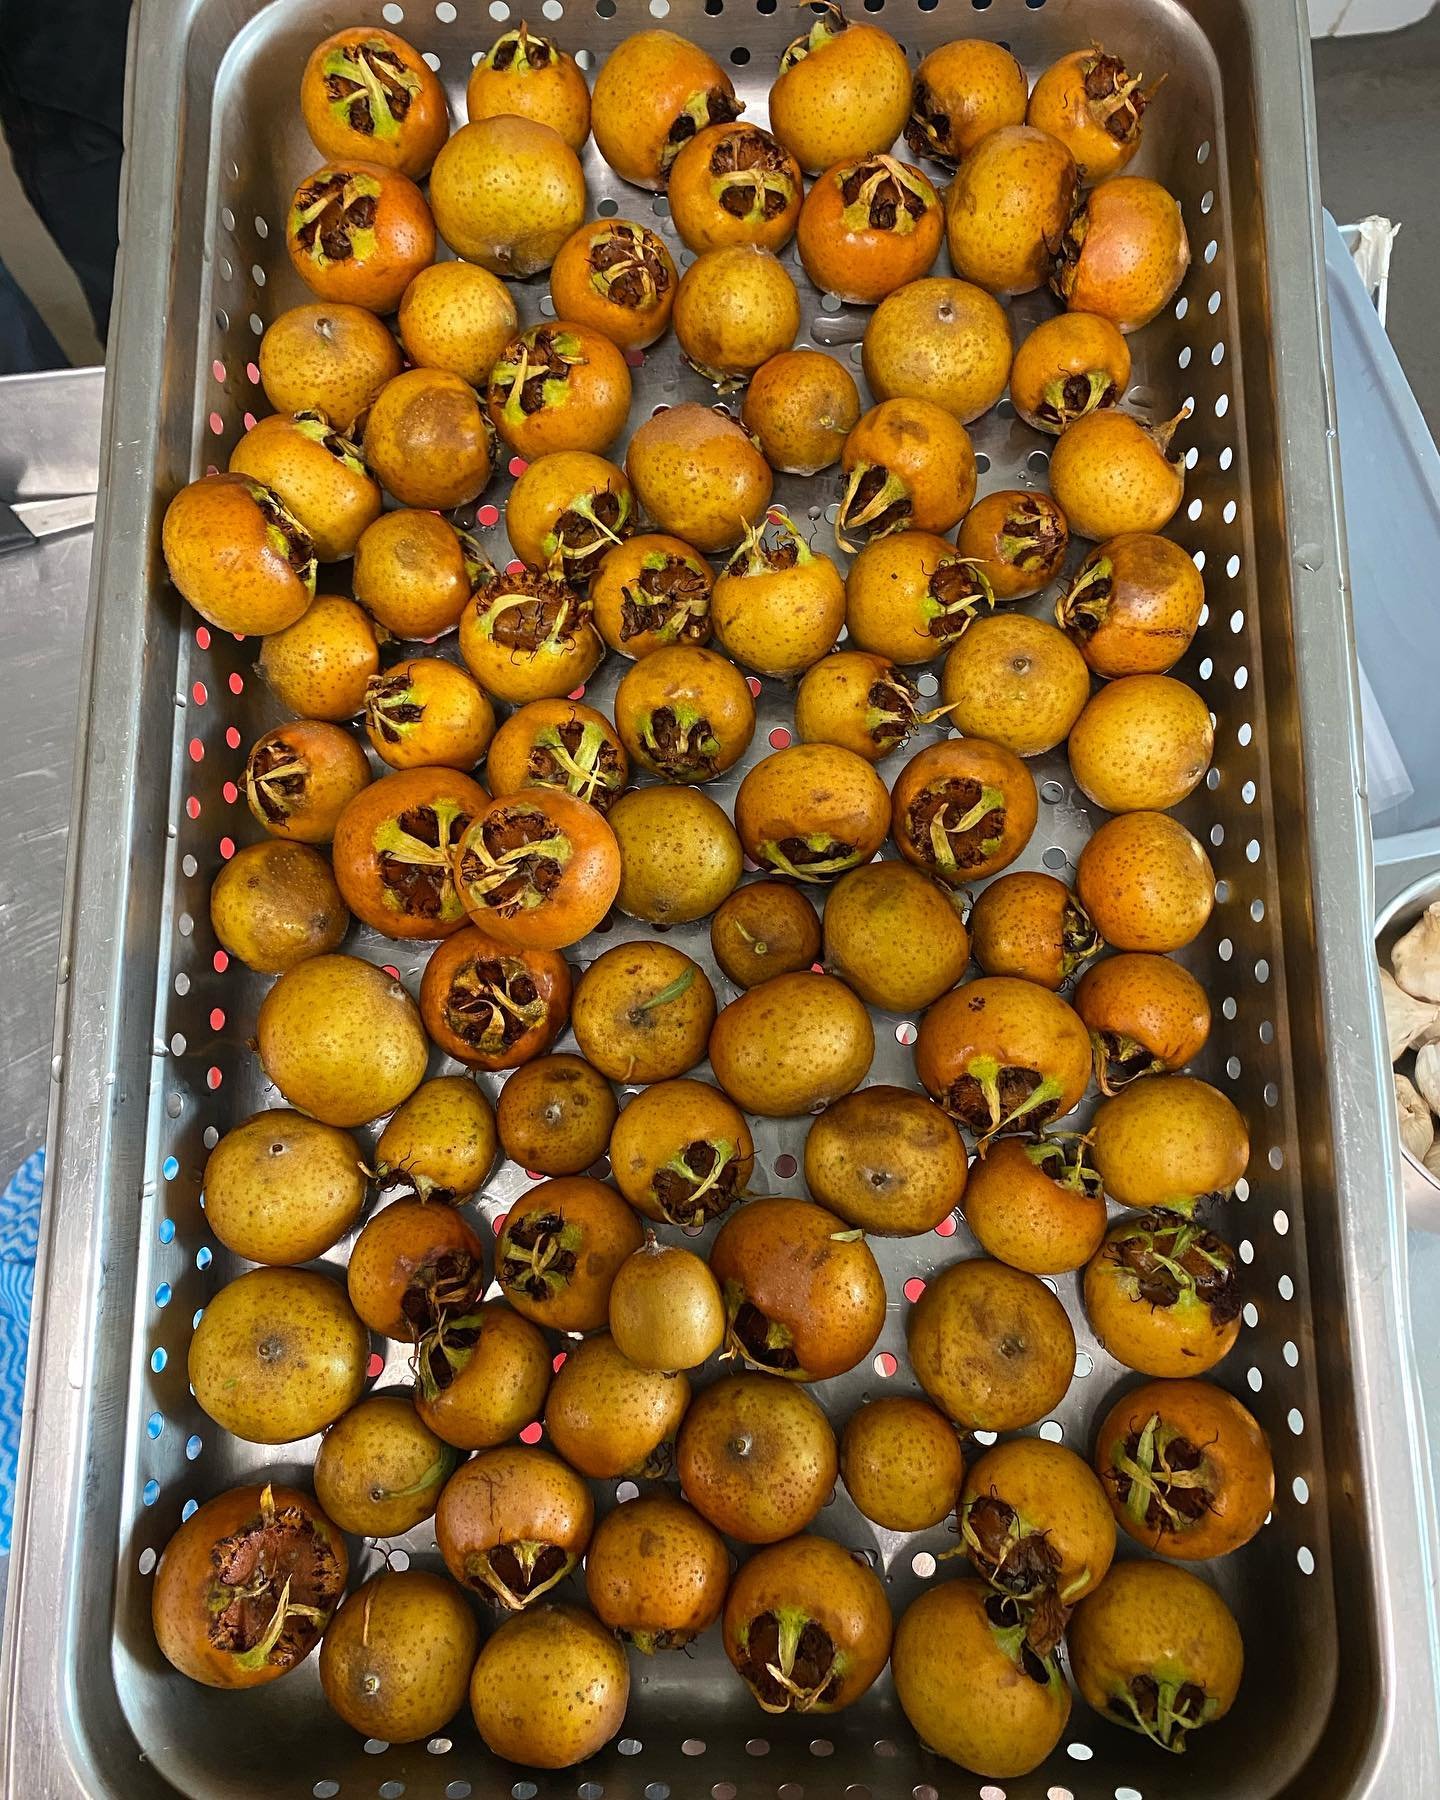 The end of the warmer weather gives us a chance to capture some peak summer produce using fermentation/ pickling &amp; preservation, allowing us to let a little sunshine in on our plates through the cooler months of winter.

1/ medlars that are &ldqu